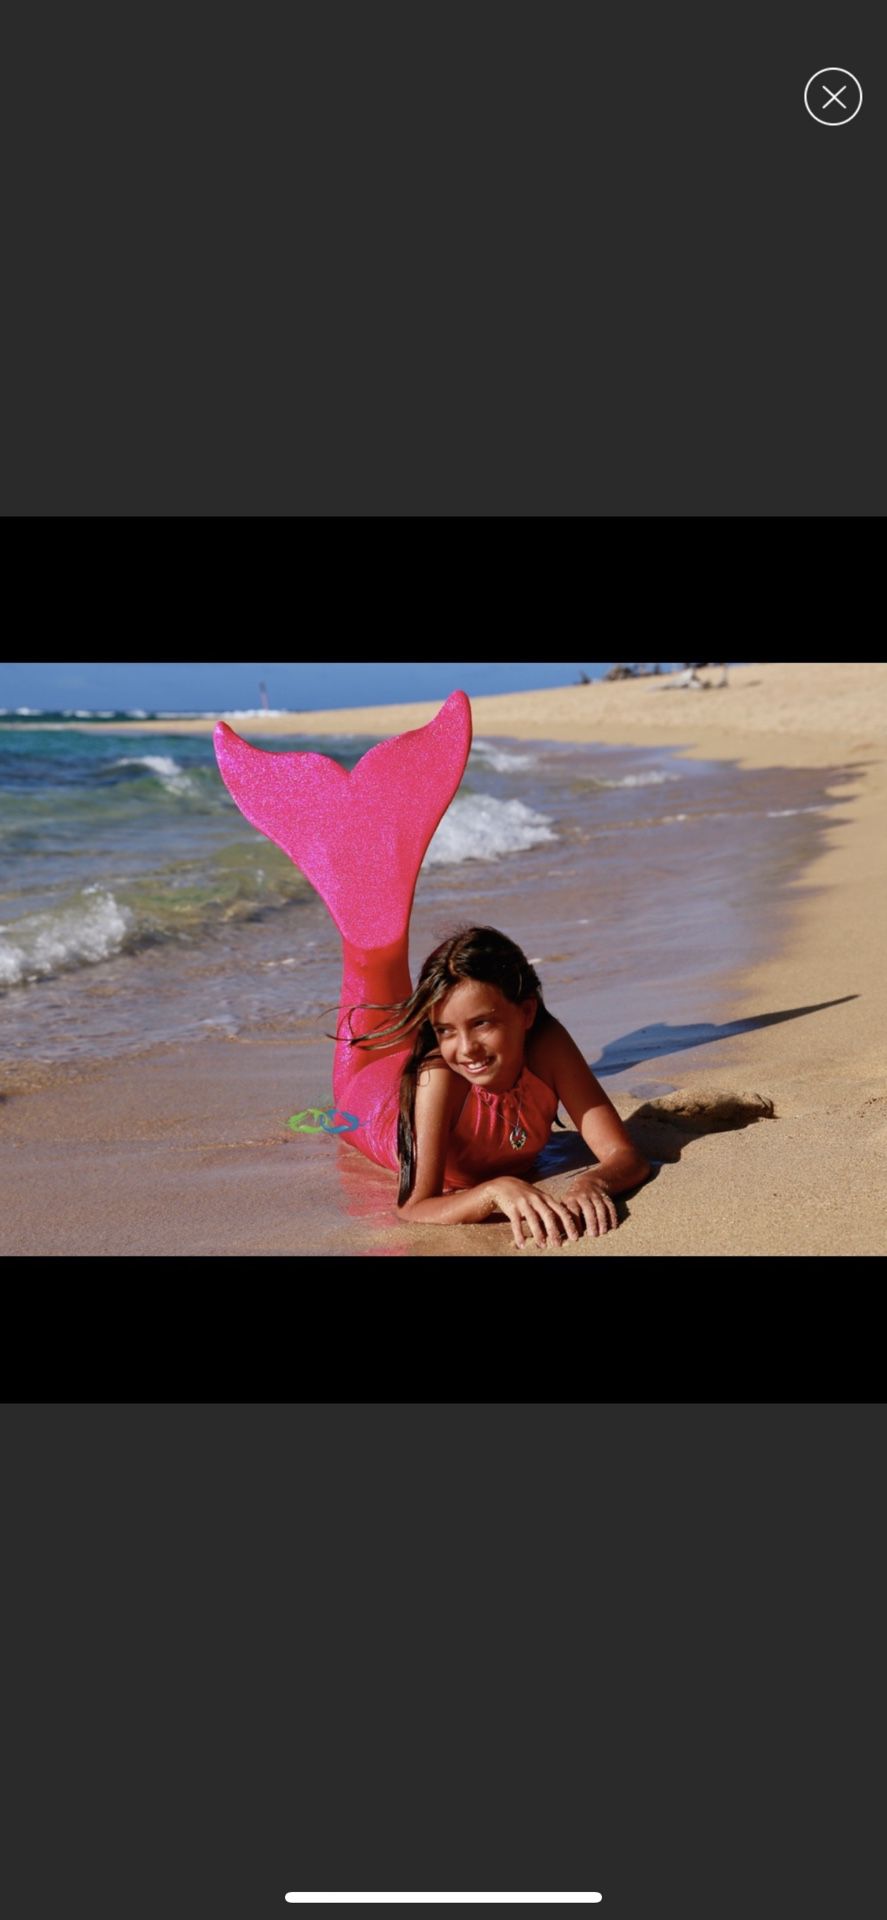 Mermaid tail for kids paid $150